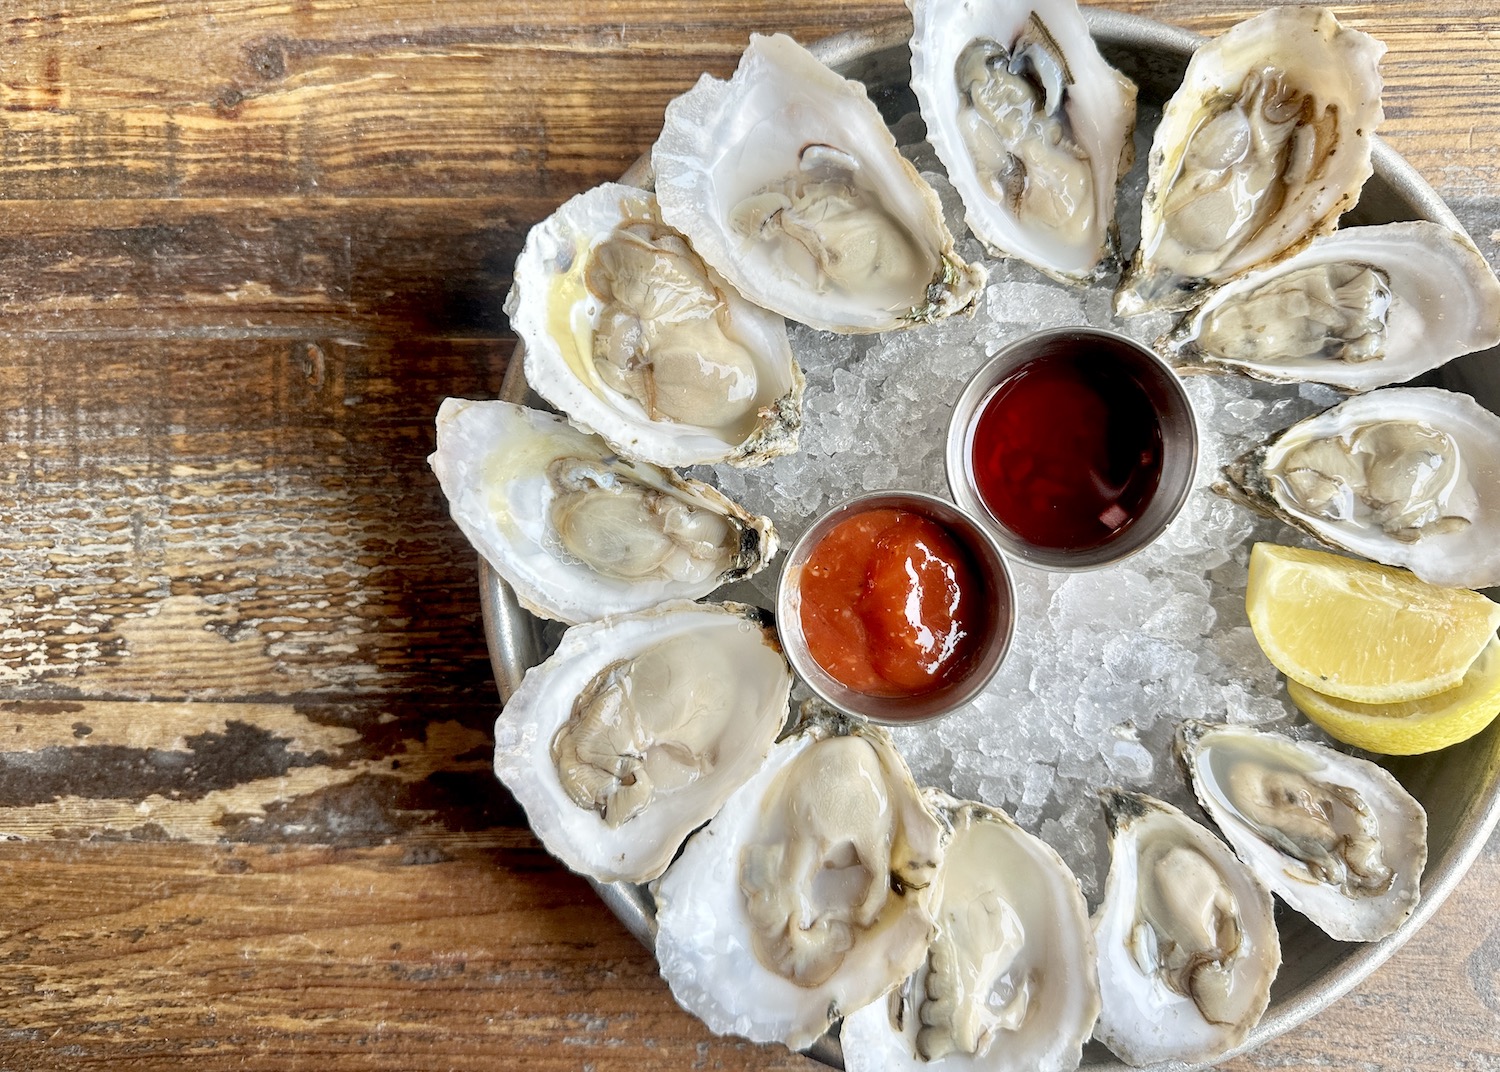 Oysters on ice with sauces.